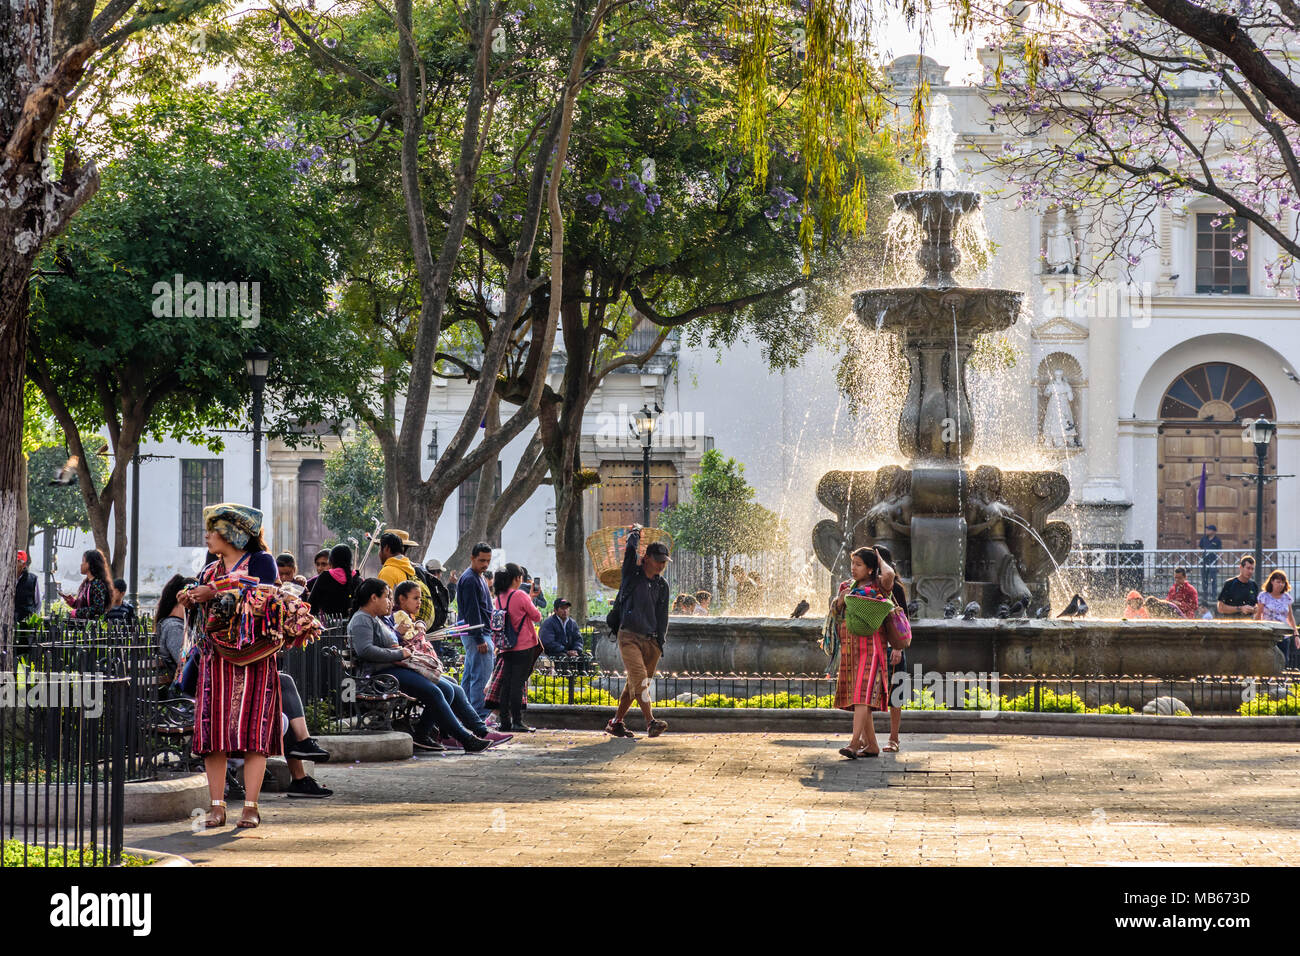 Antigua, Guatemala - March 30, 2018: Early morning vendors & tourists on Good Friday in central plaza in colonial city & UNESCO World Heritage Site Stock Photo